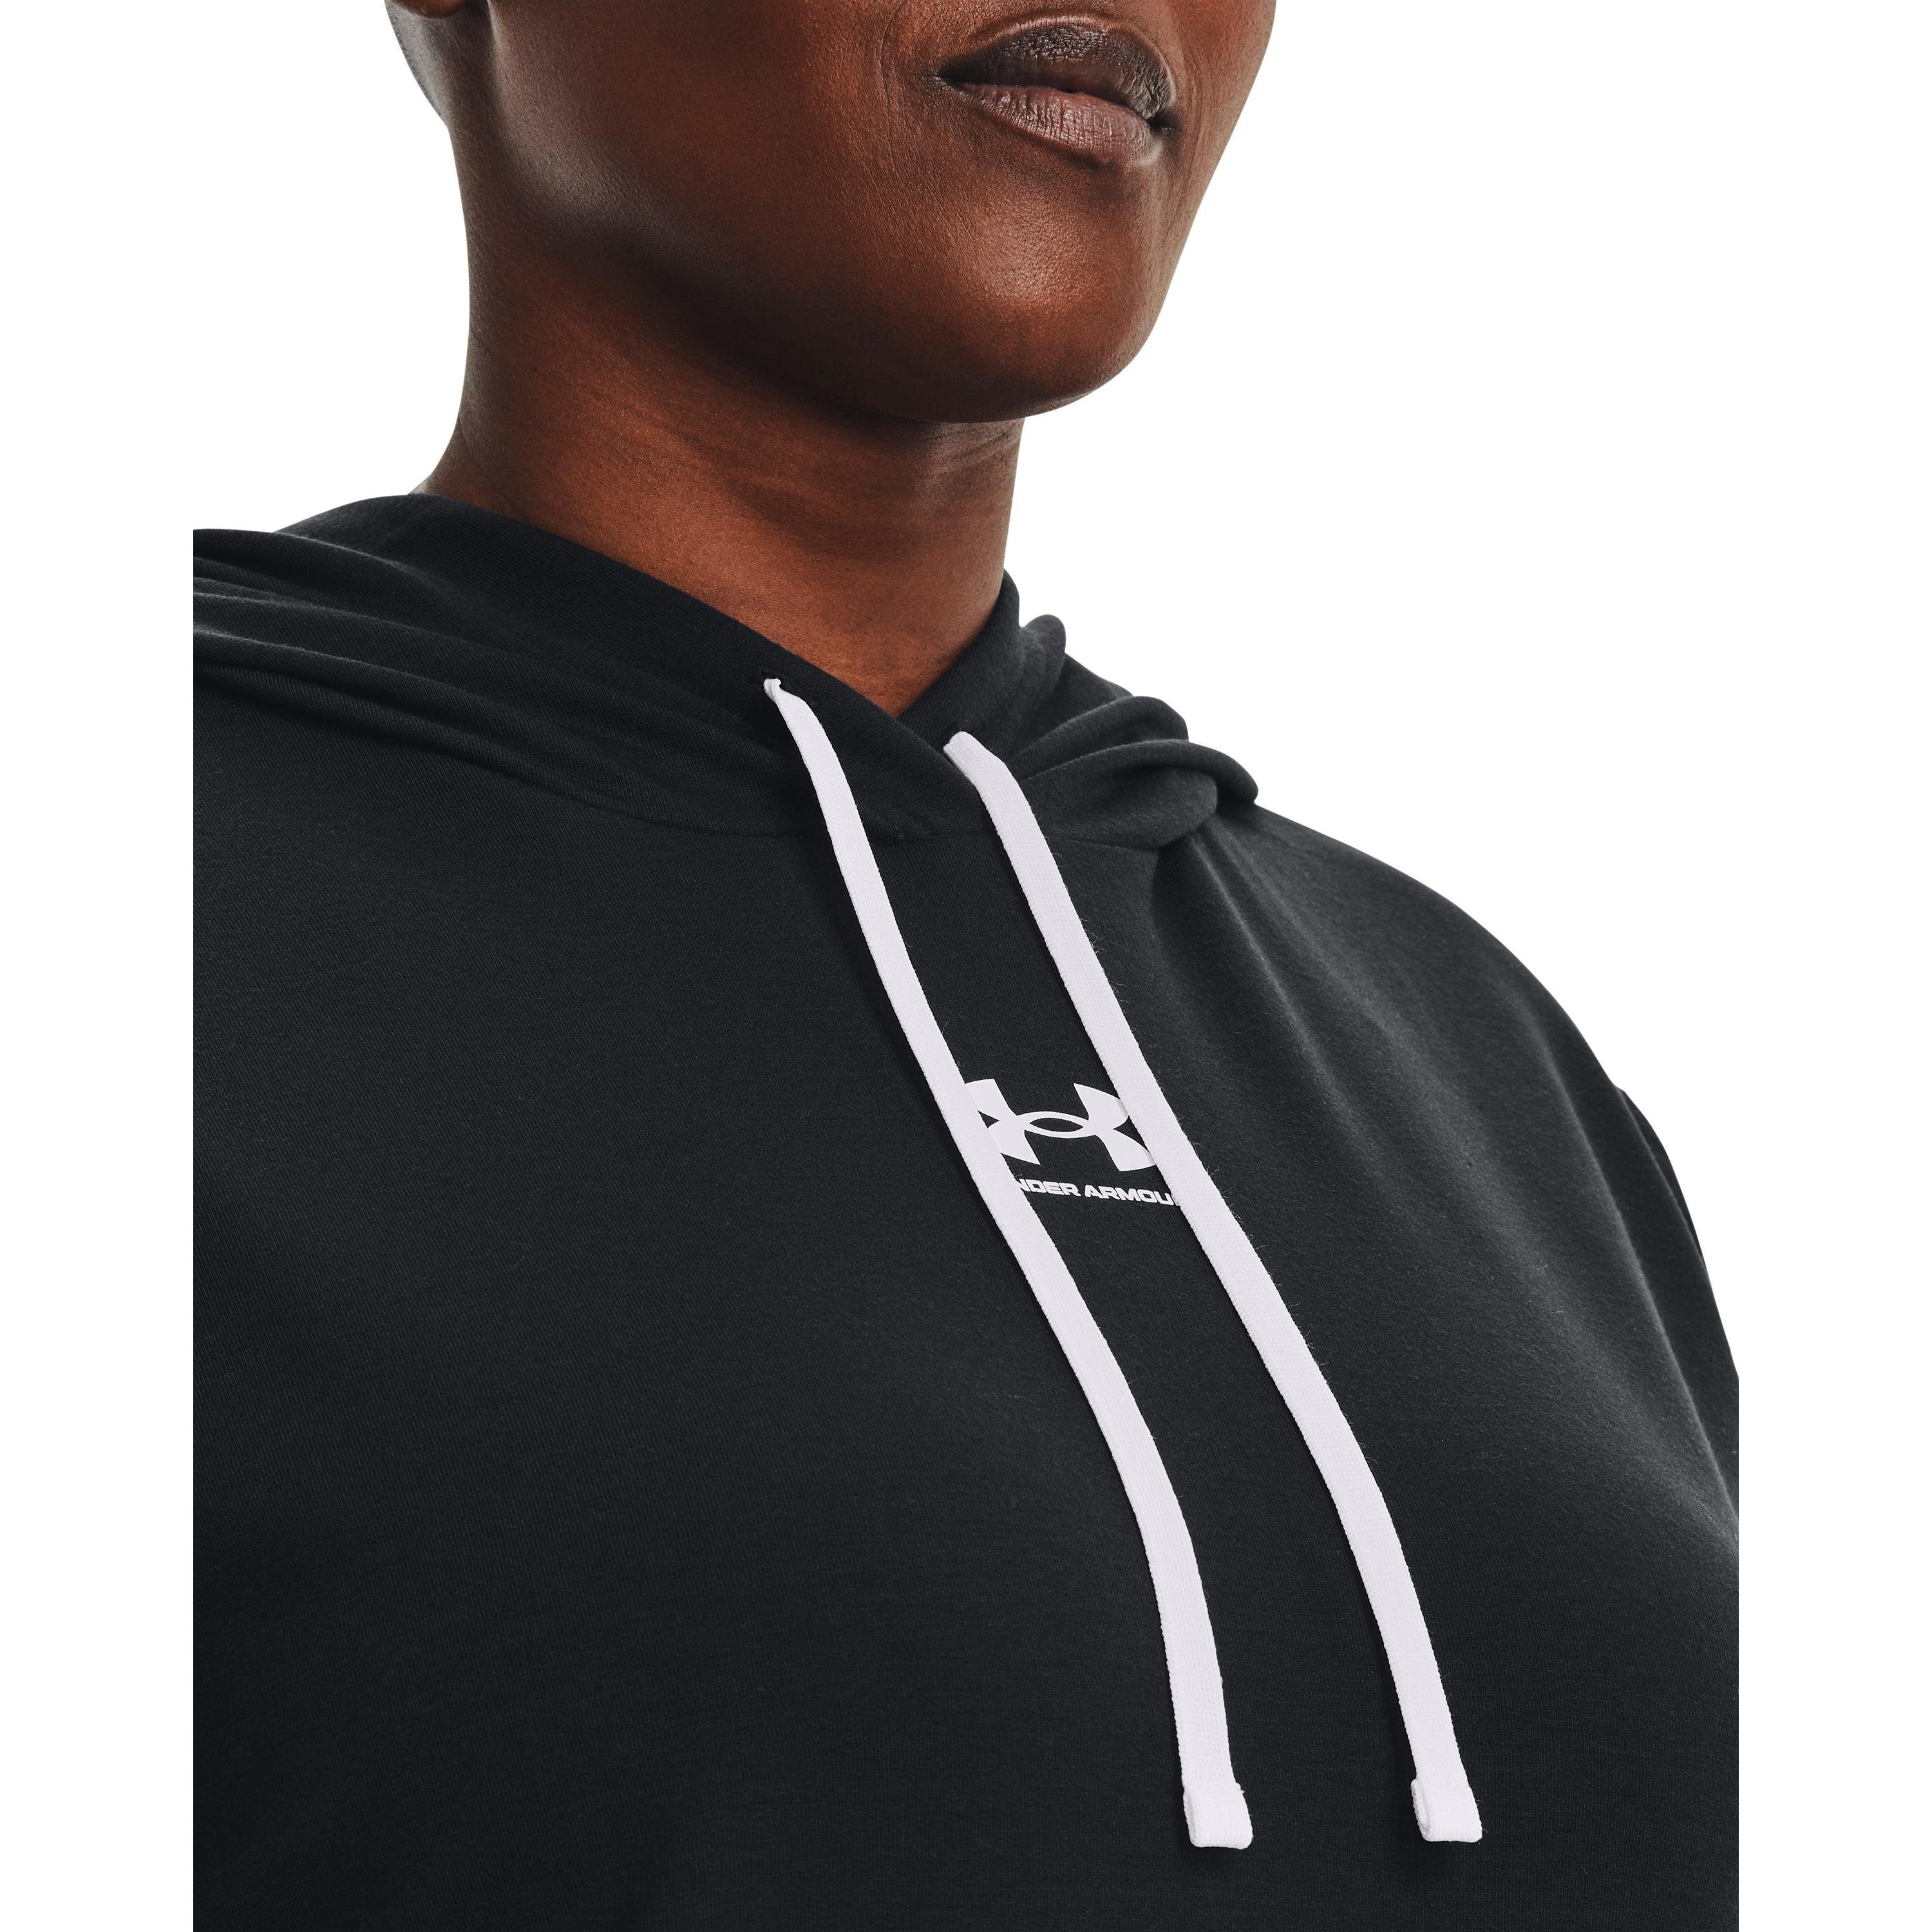 Under Armour® Funktionsshirt Rival Terry Black 001